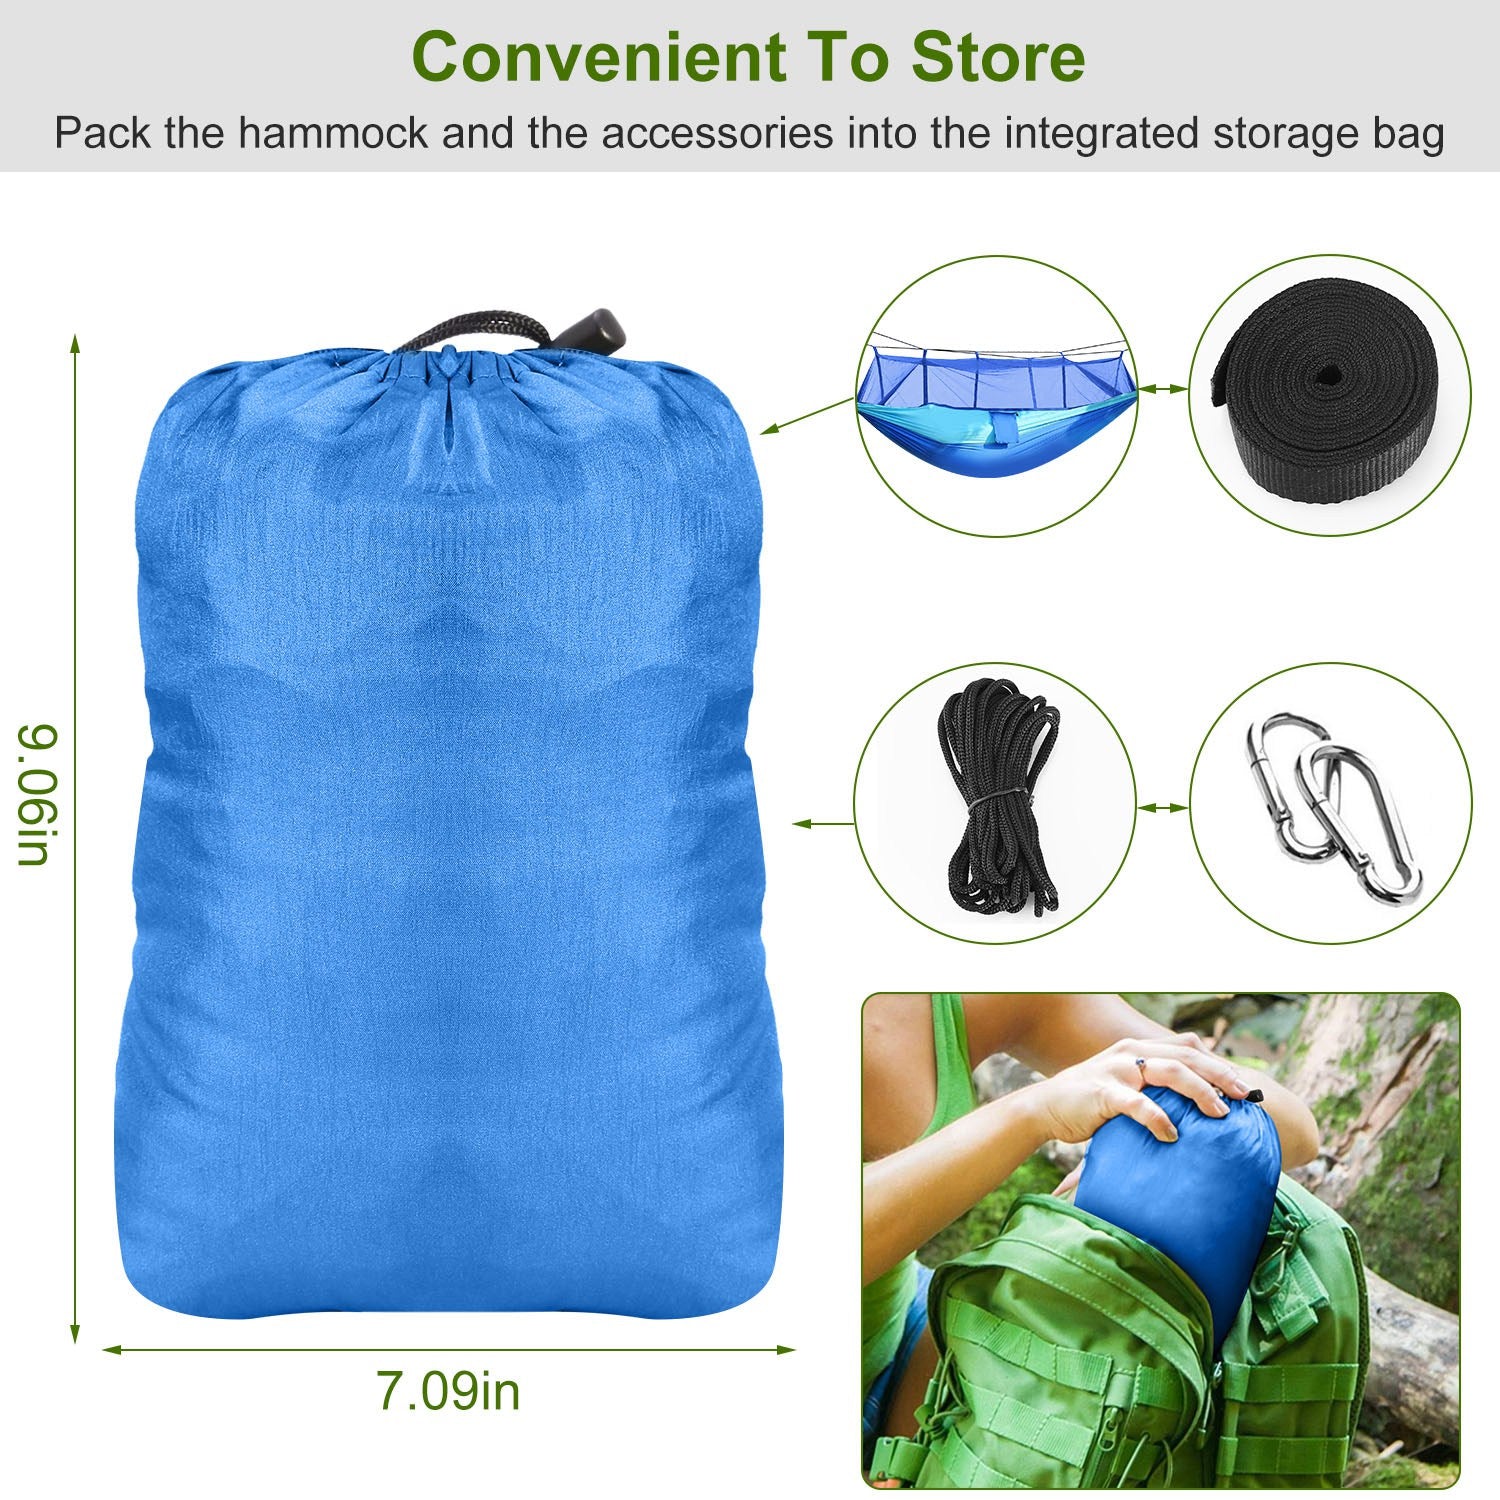 iMounTEK Camping Hammock with Mosquito Net 2 People Portable Hiking Tent with Strap Hook Carry Bag 102x55in - Reversible, breathable, Lightweight, Ripstop Nylon -  Blue